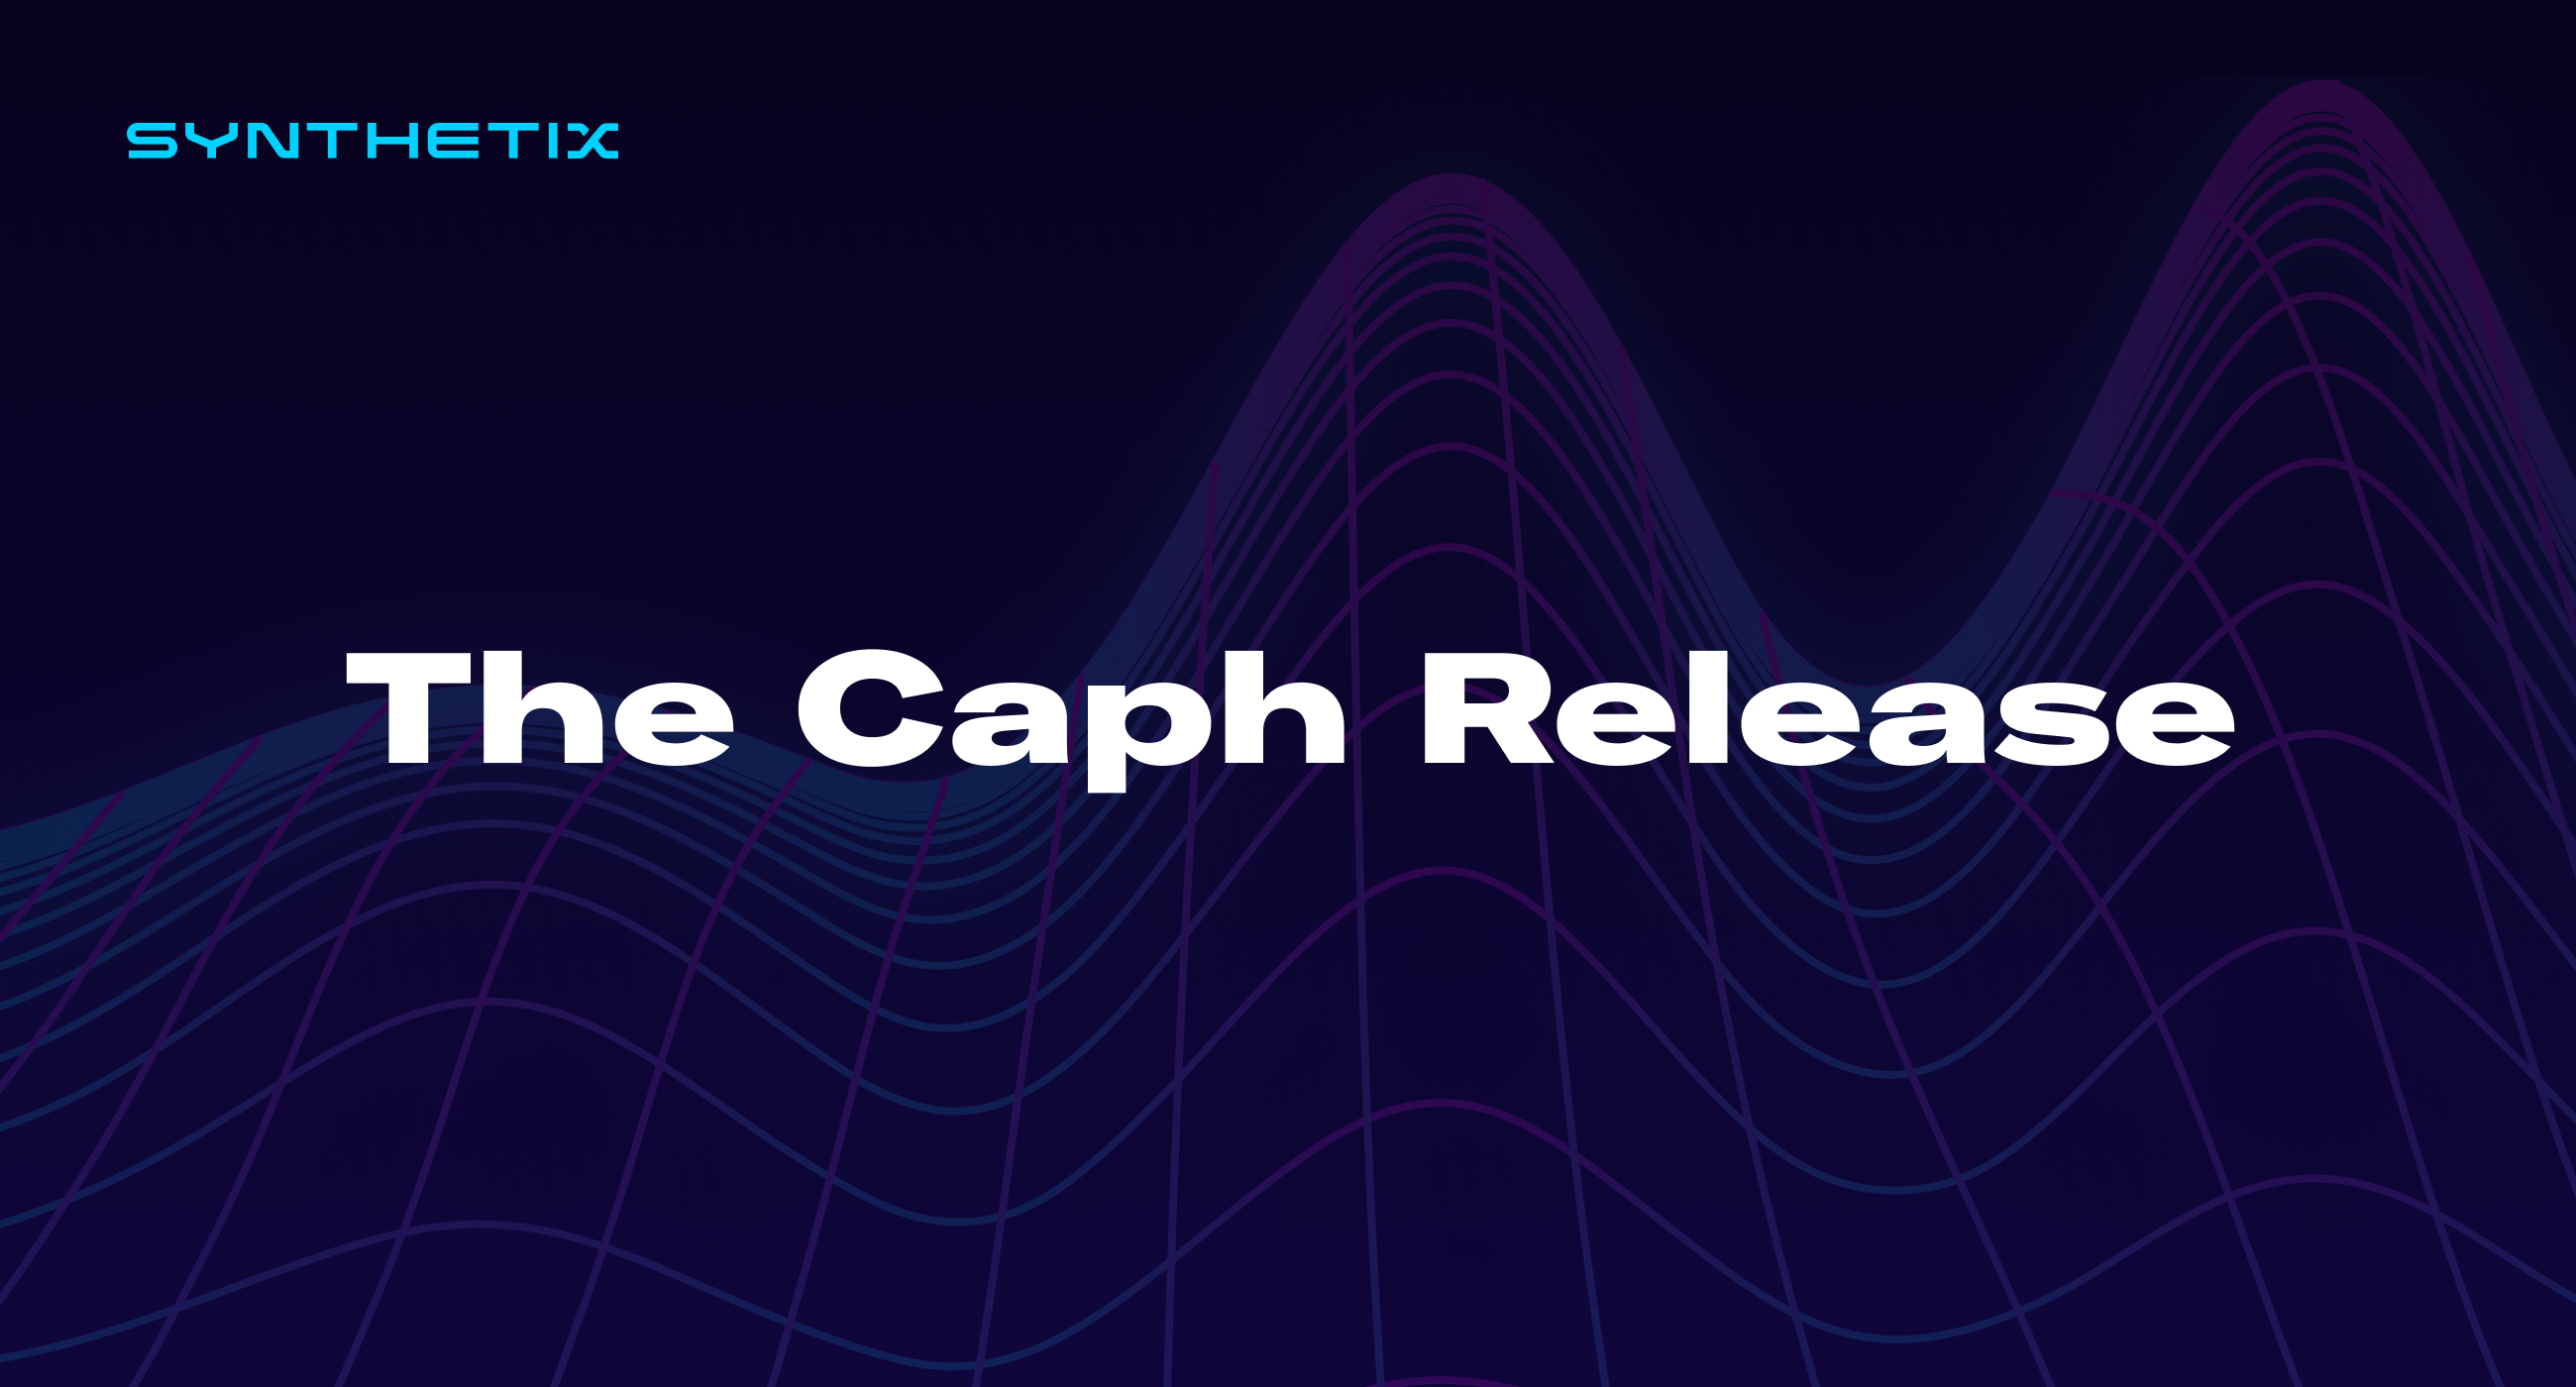 The Caph Release - SIP 2004/2005